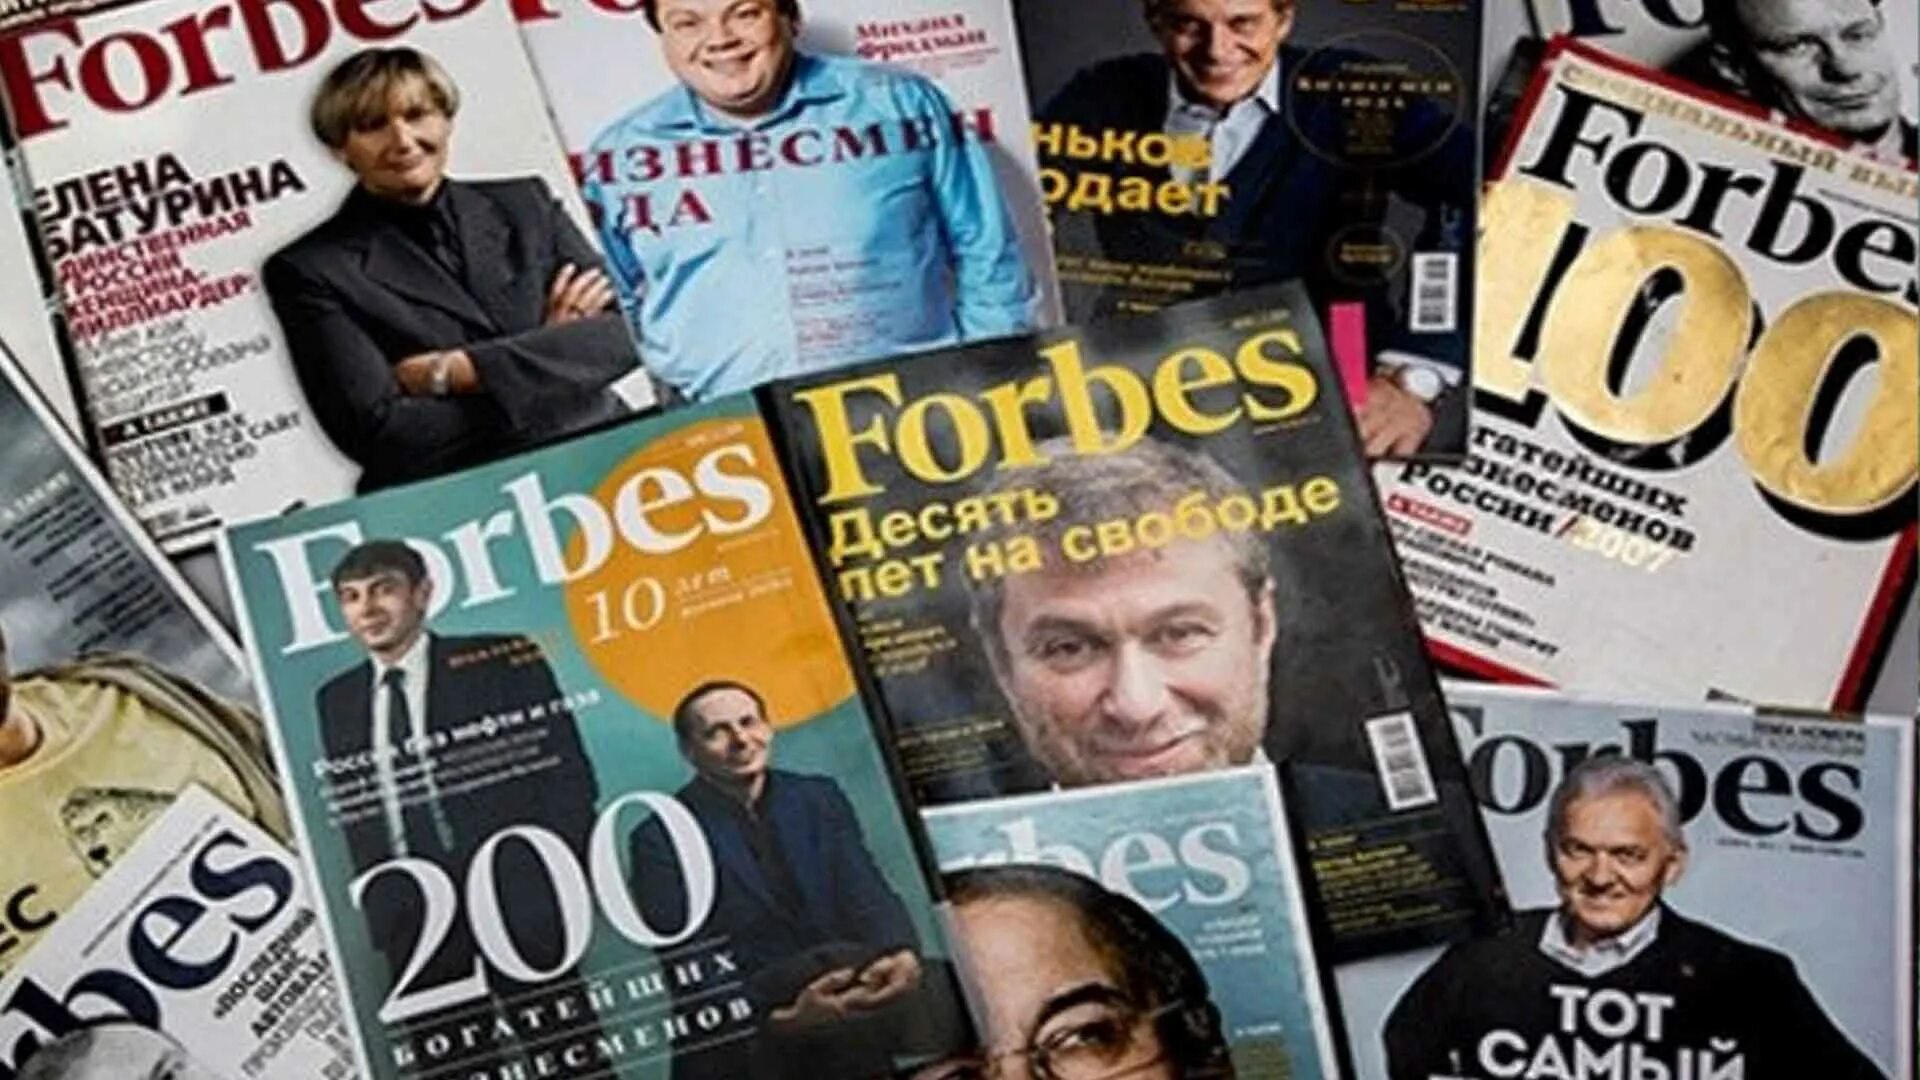 Forbes богатые россии. Обложка журнала Forbes. Журнал форбс картинки. Обложка Forbes Россия. Форбс русский журнал обложки.